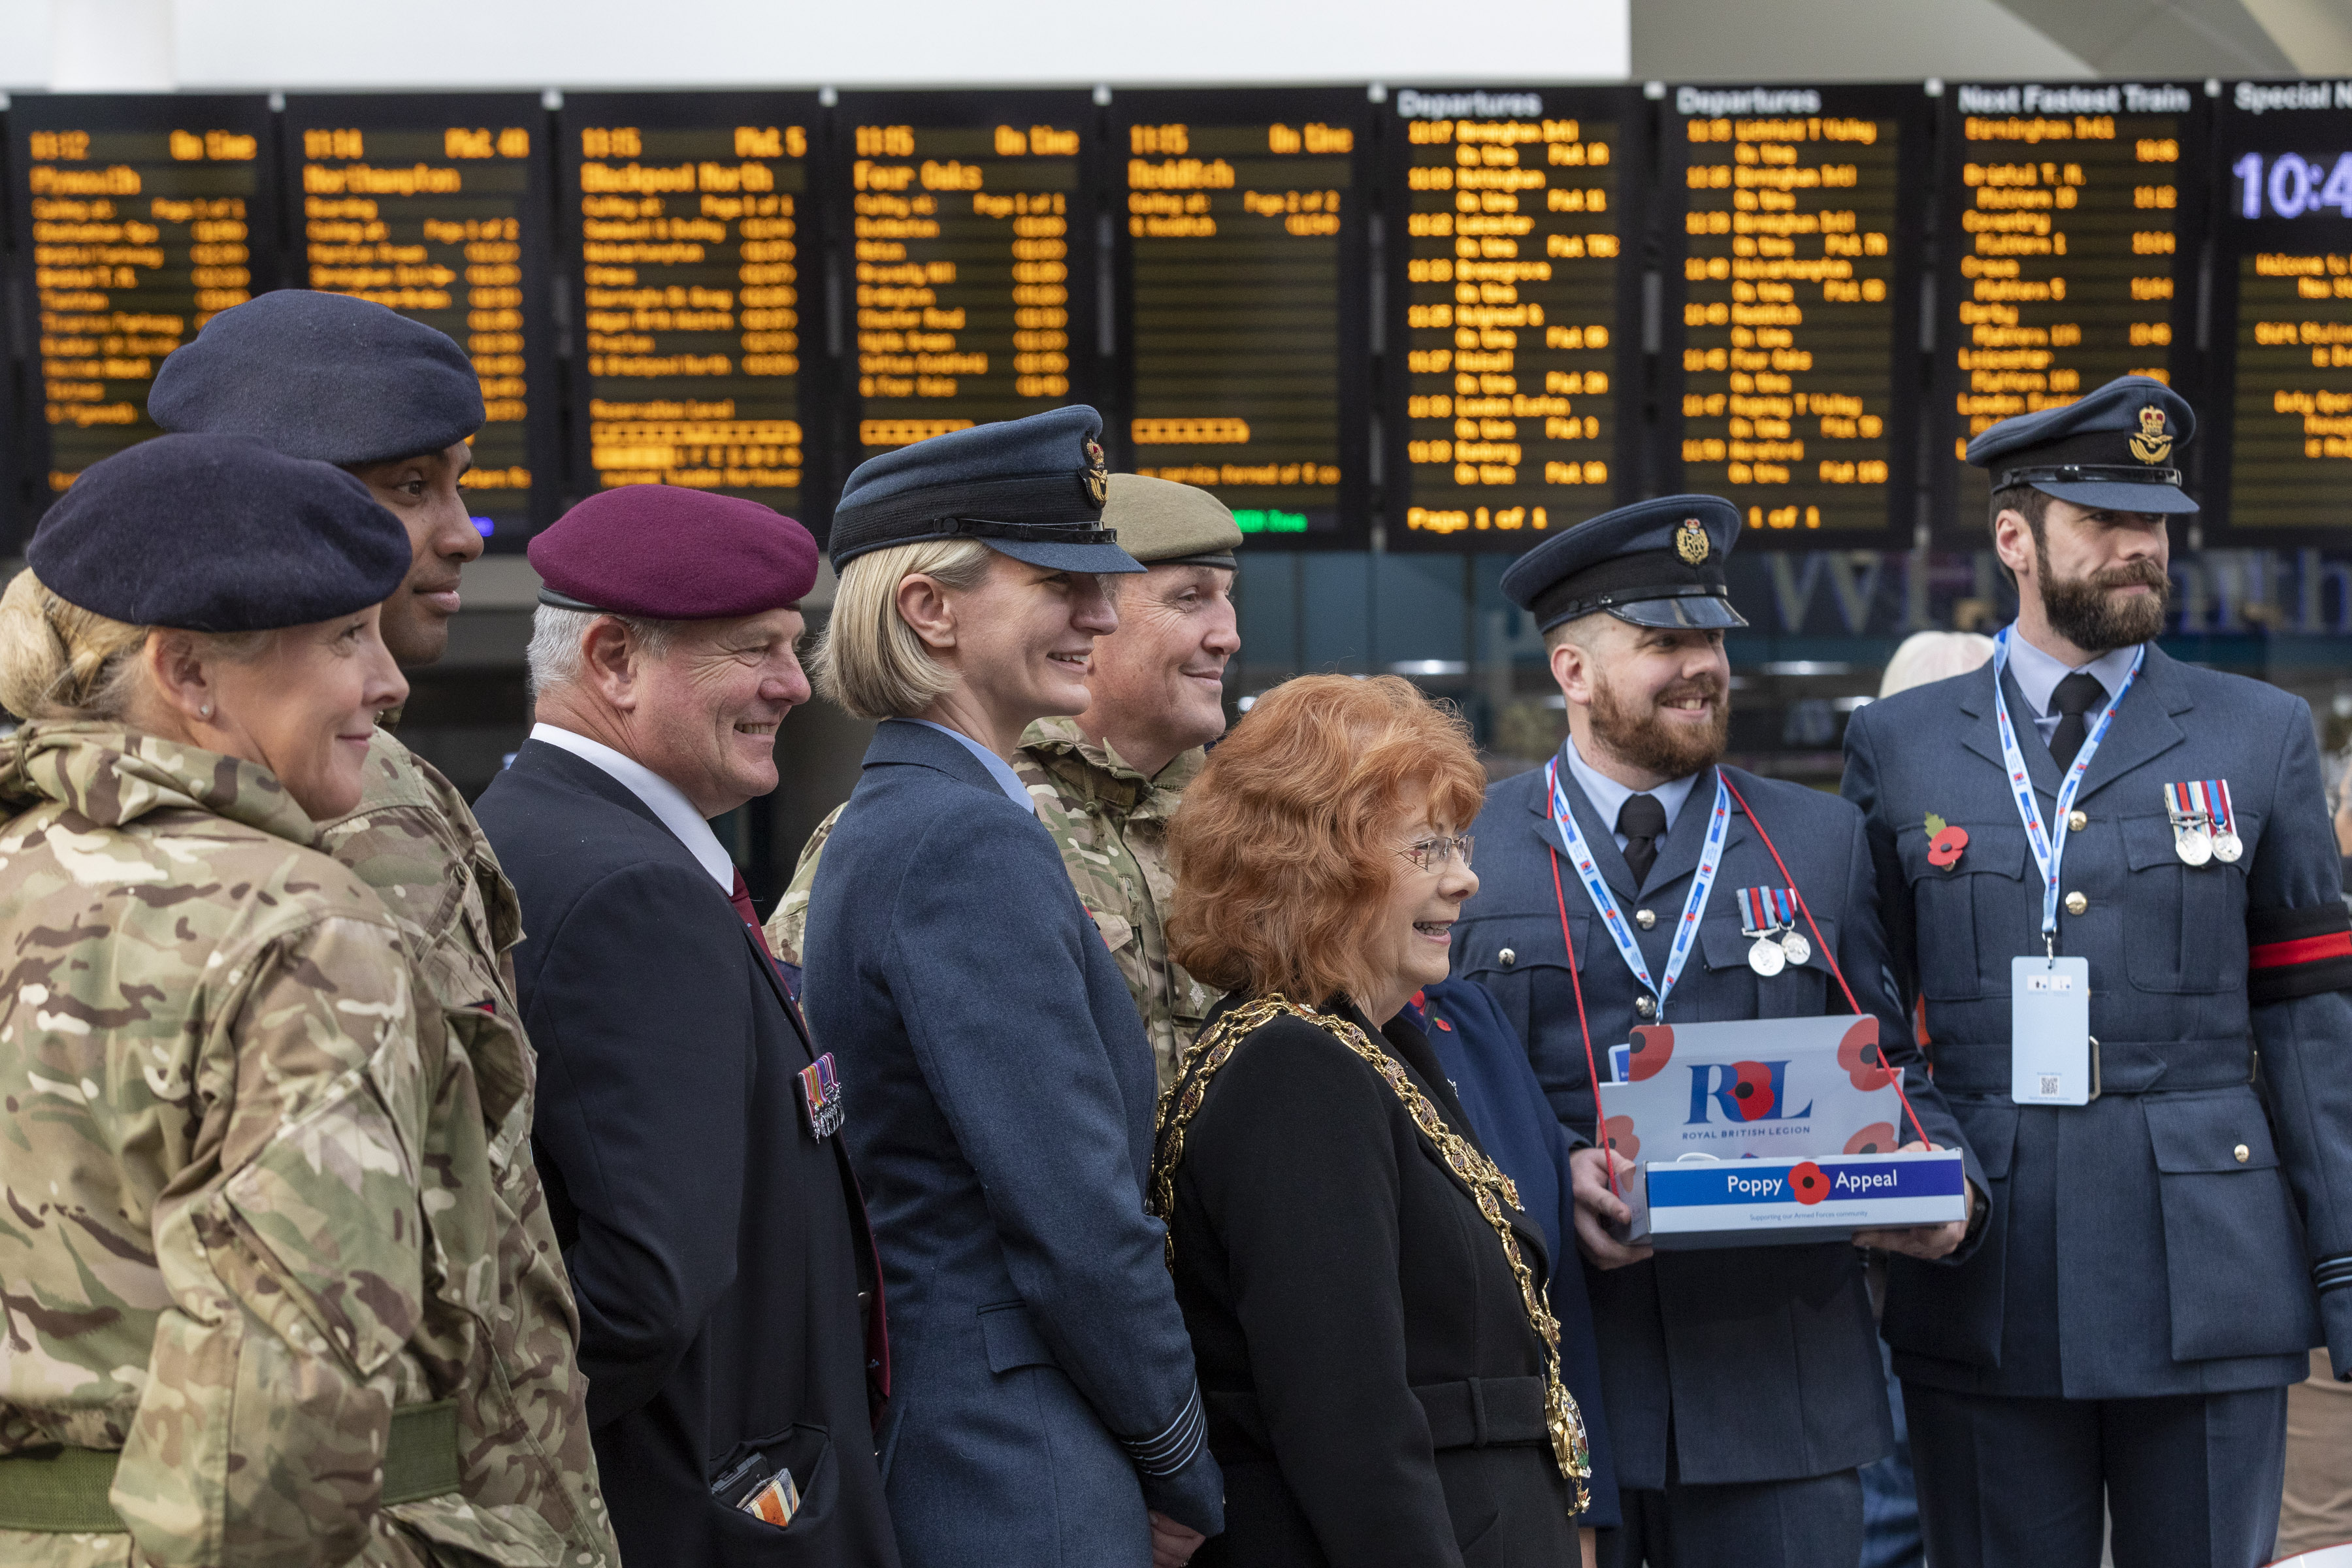 Image shows RAF aviators holding poppy collection boxes in train station.